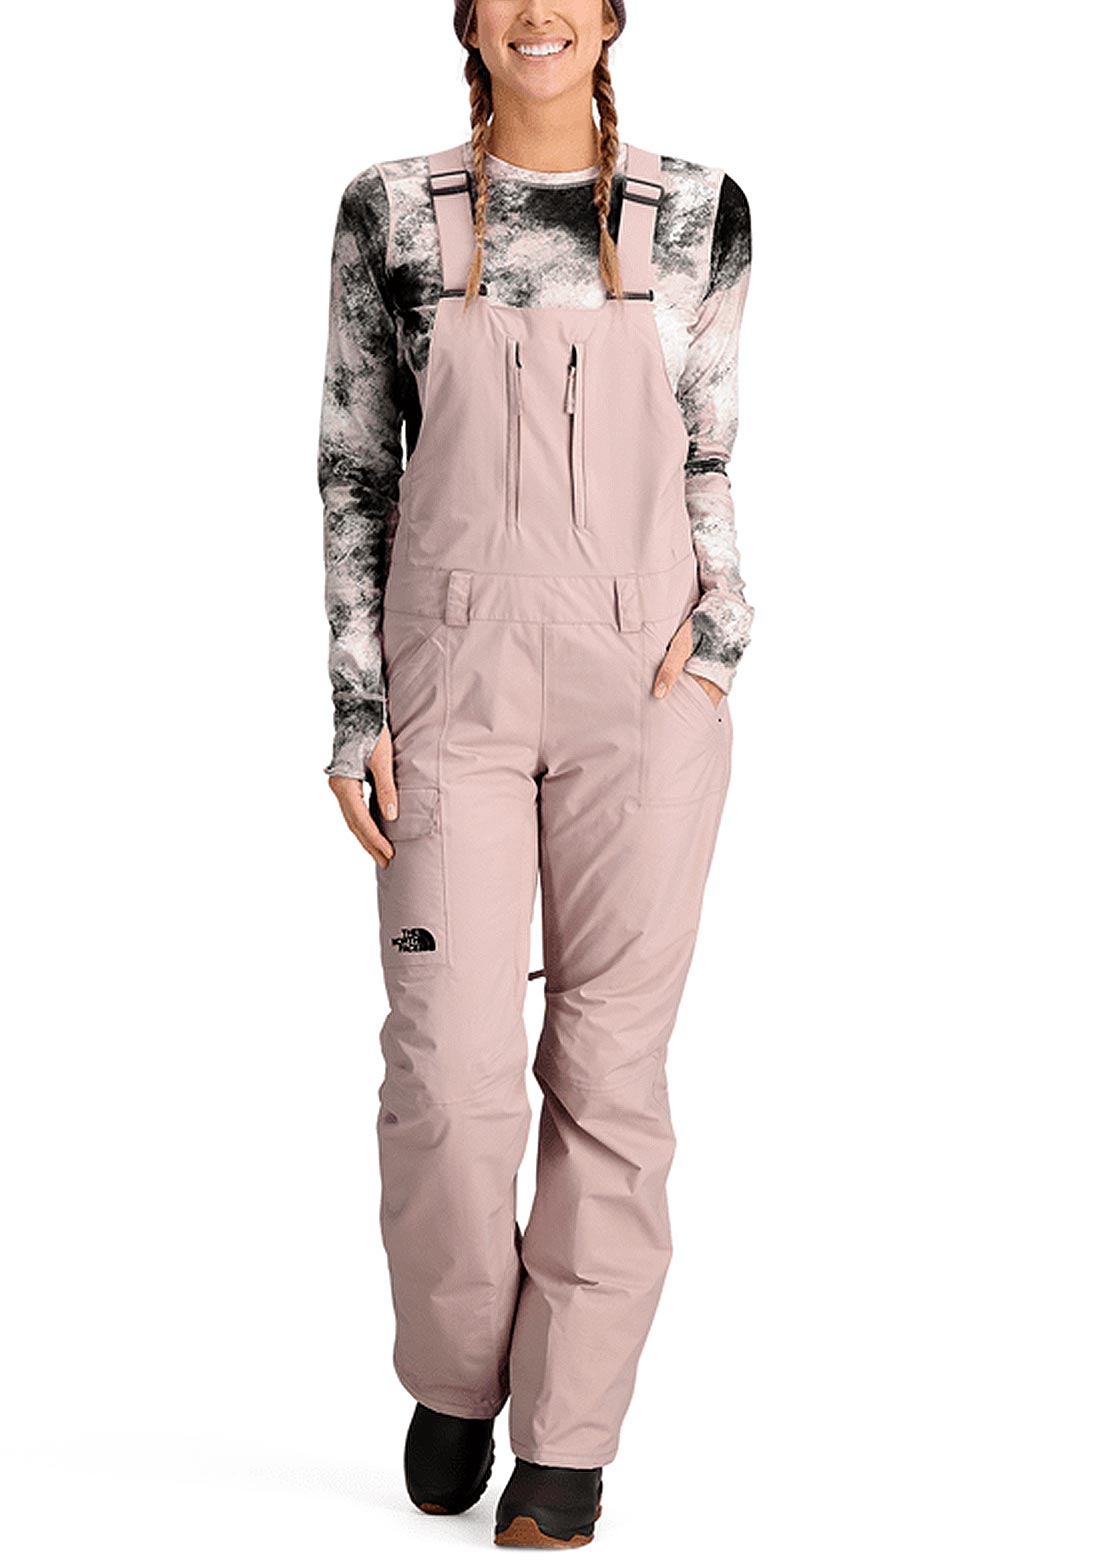 The North Face Sally Pant - Ski trousers Women's, Buy online